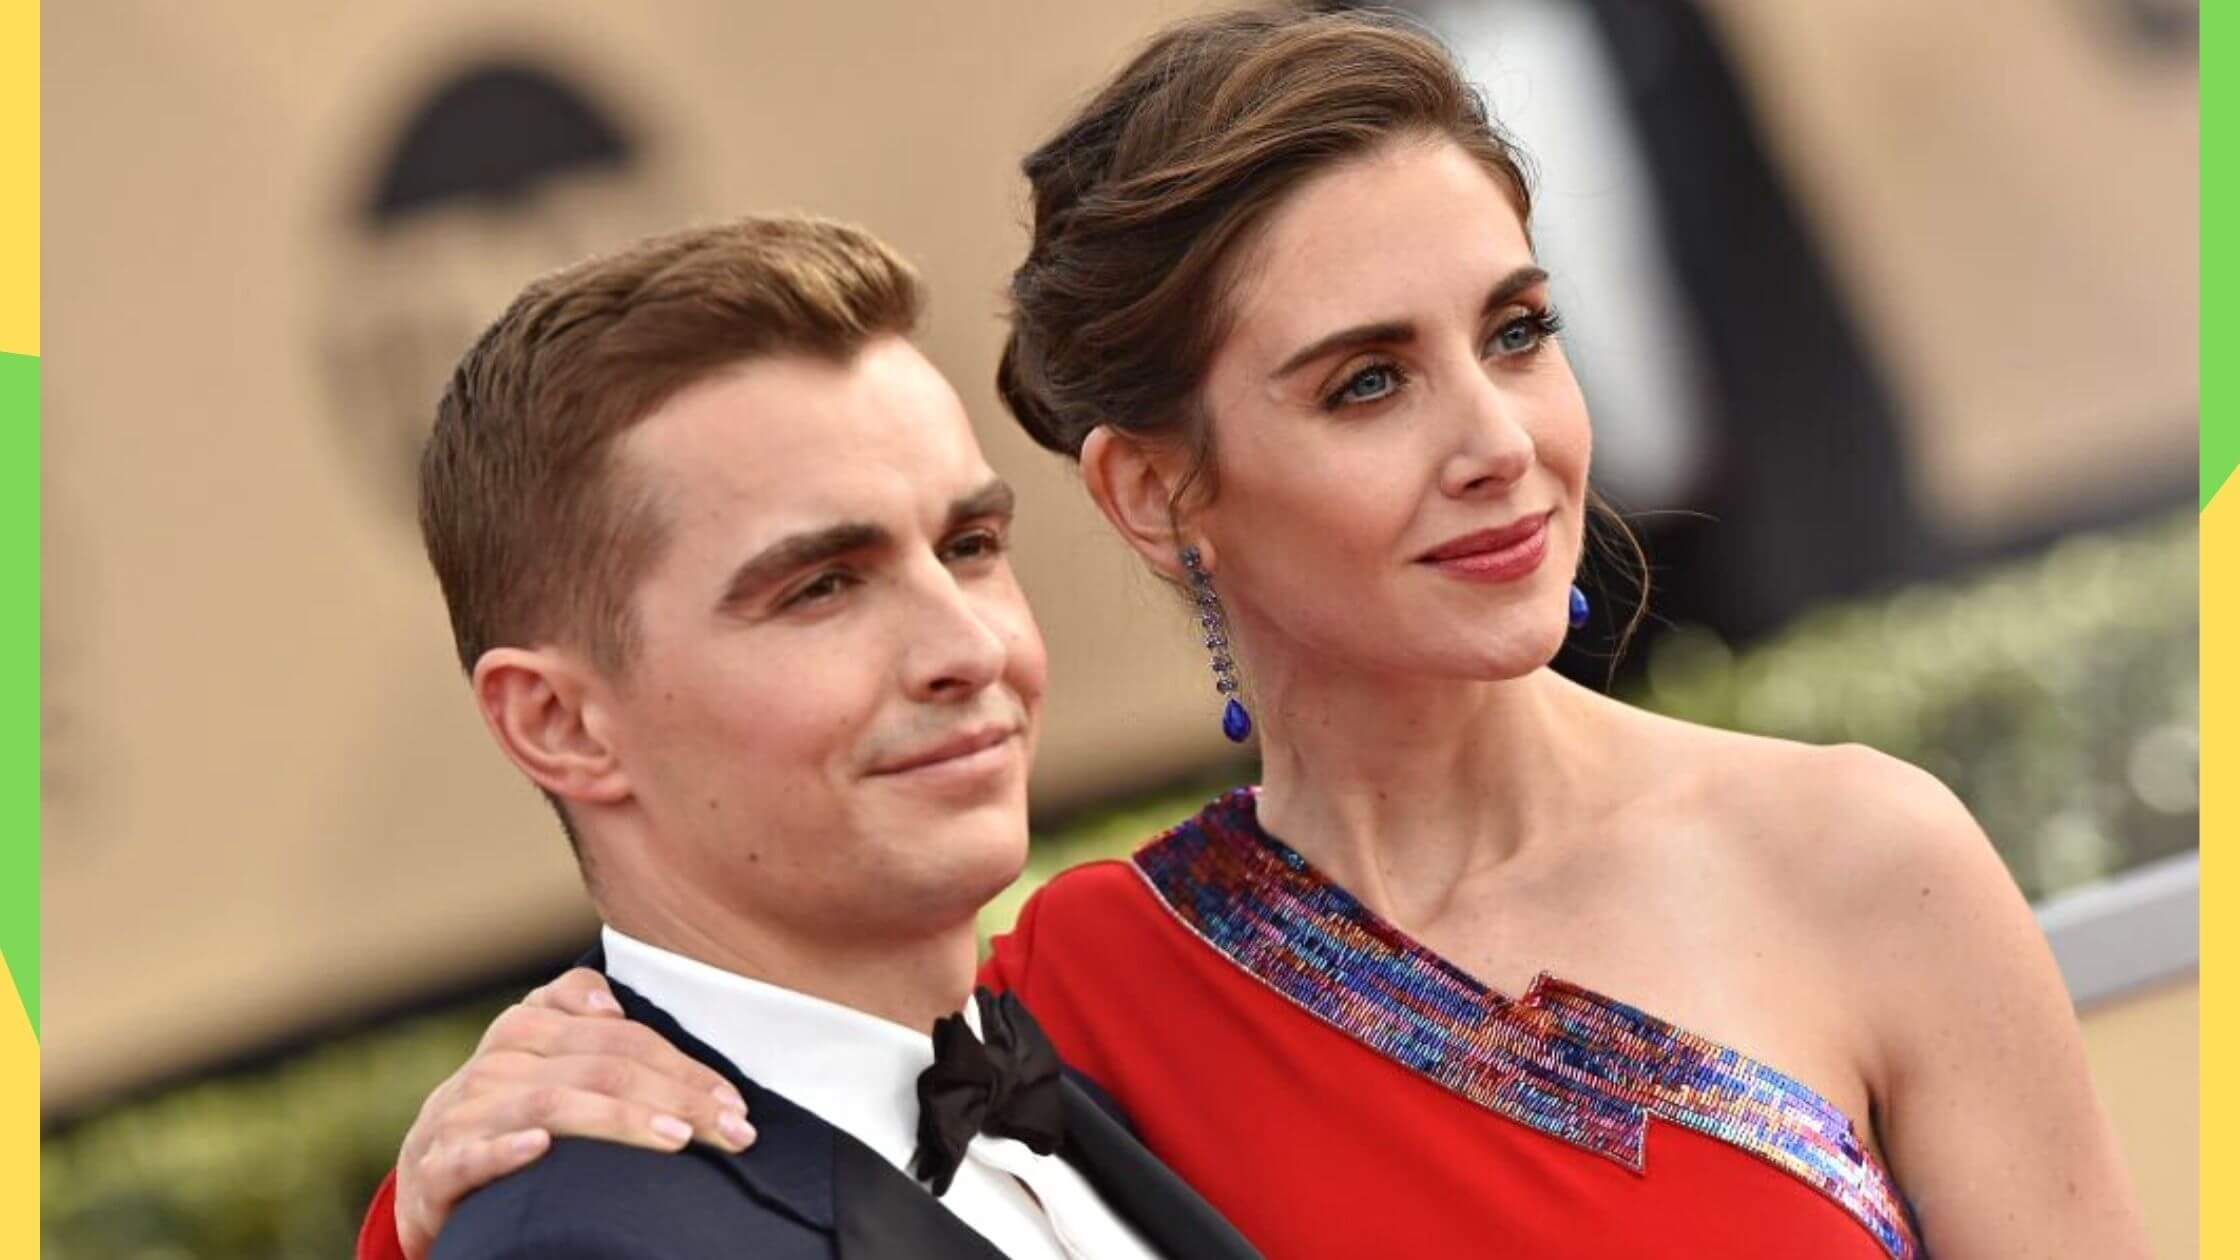 Dave-Franco-Bio-Wife-Career-Net-Worth-Marriage-Movies-Brother-Height-And-More-1